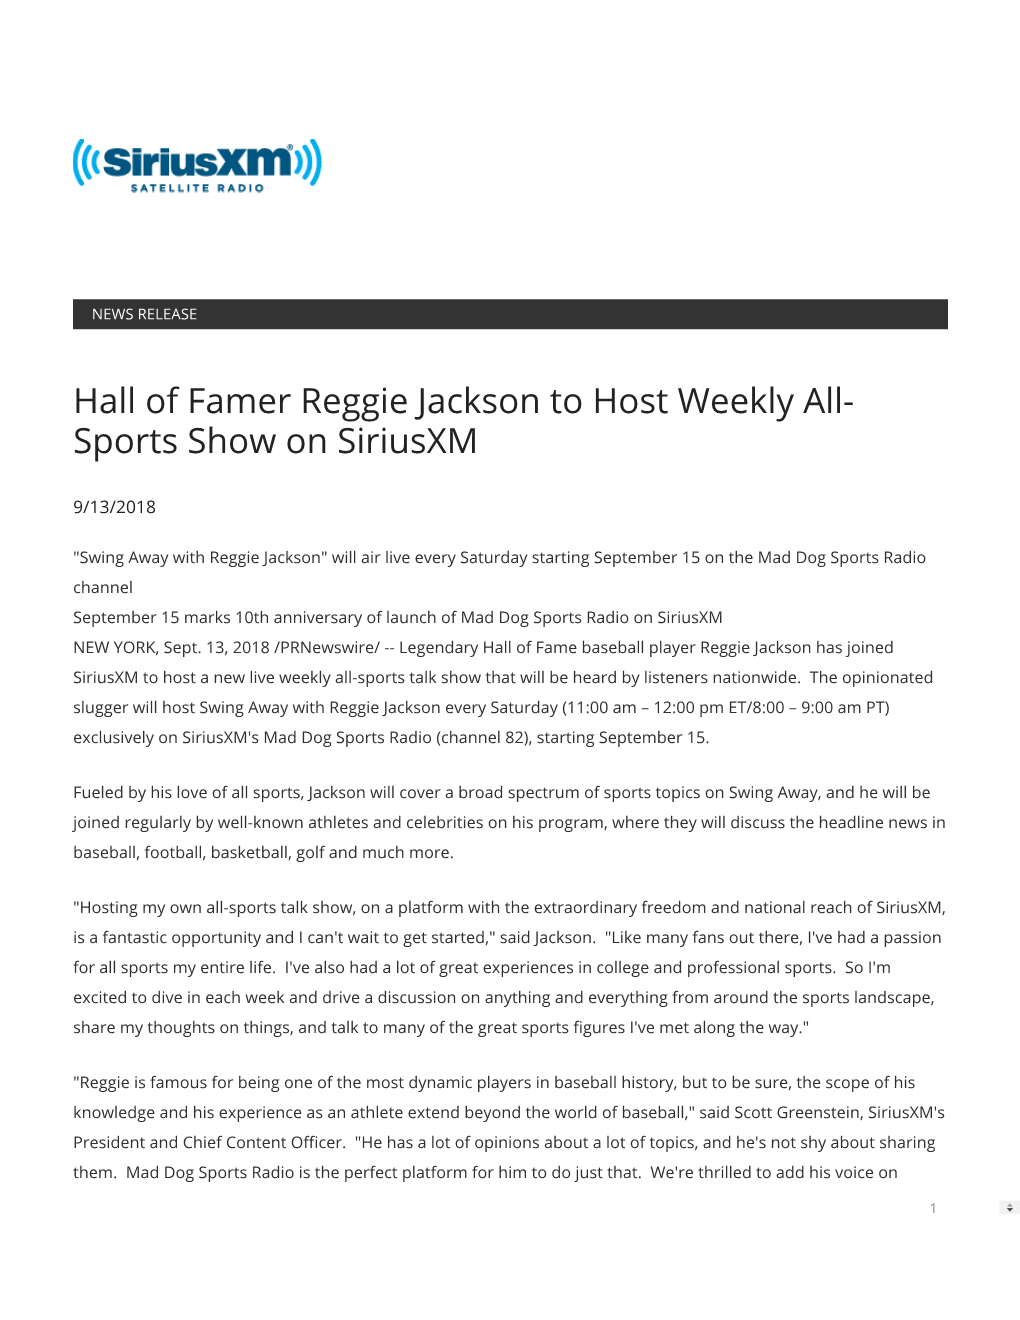 Hall of Famer Reggie Jackson to Host Weekly All- Sports Show on Siriusxm